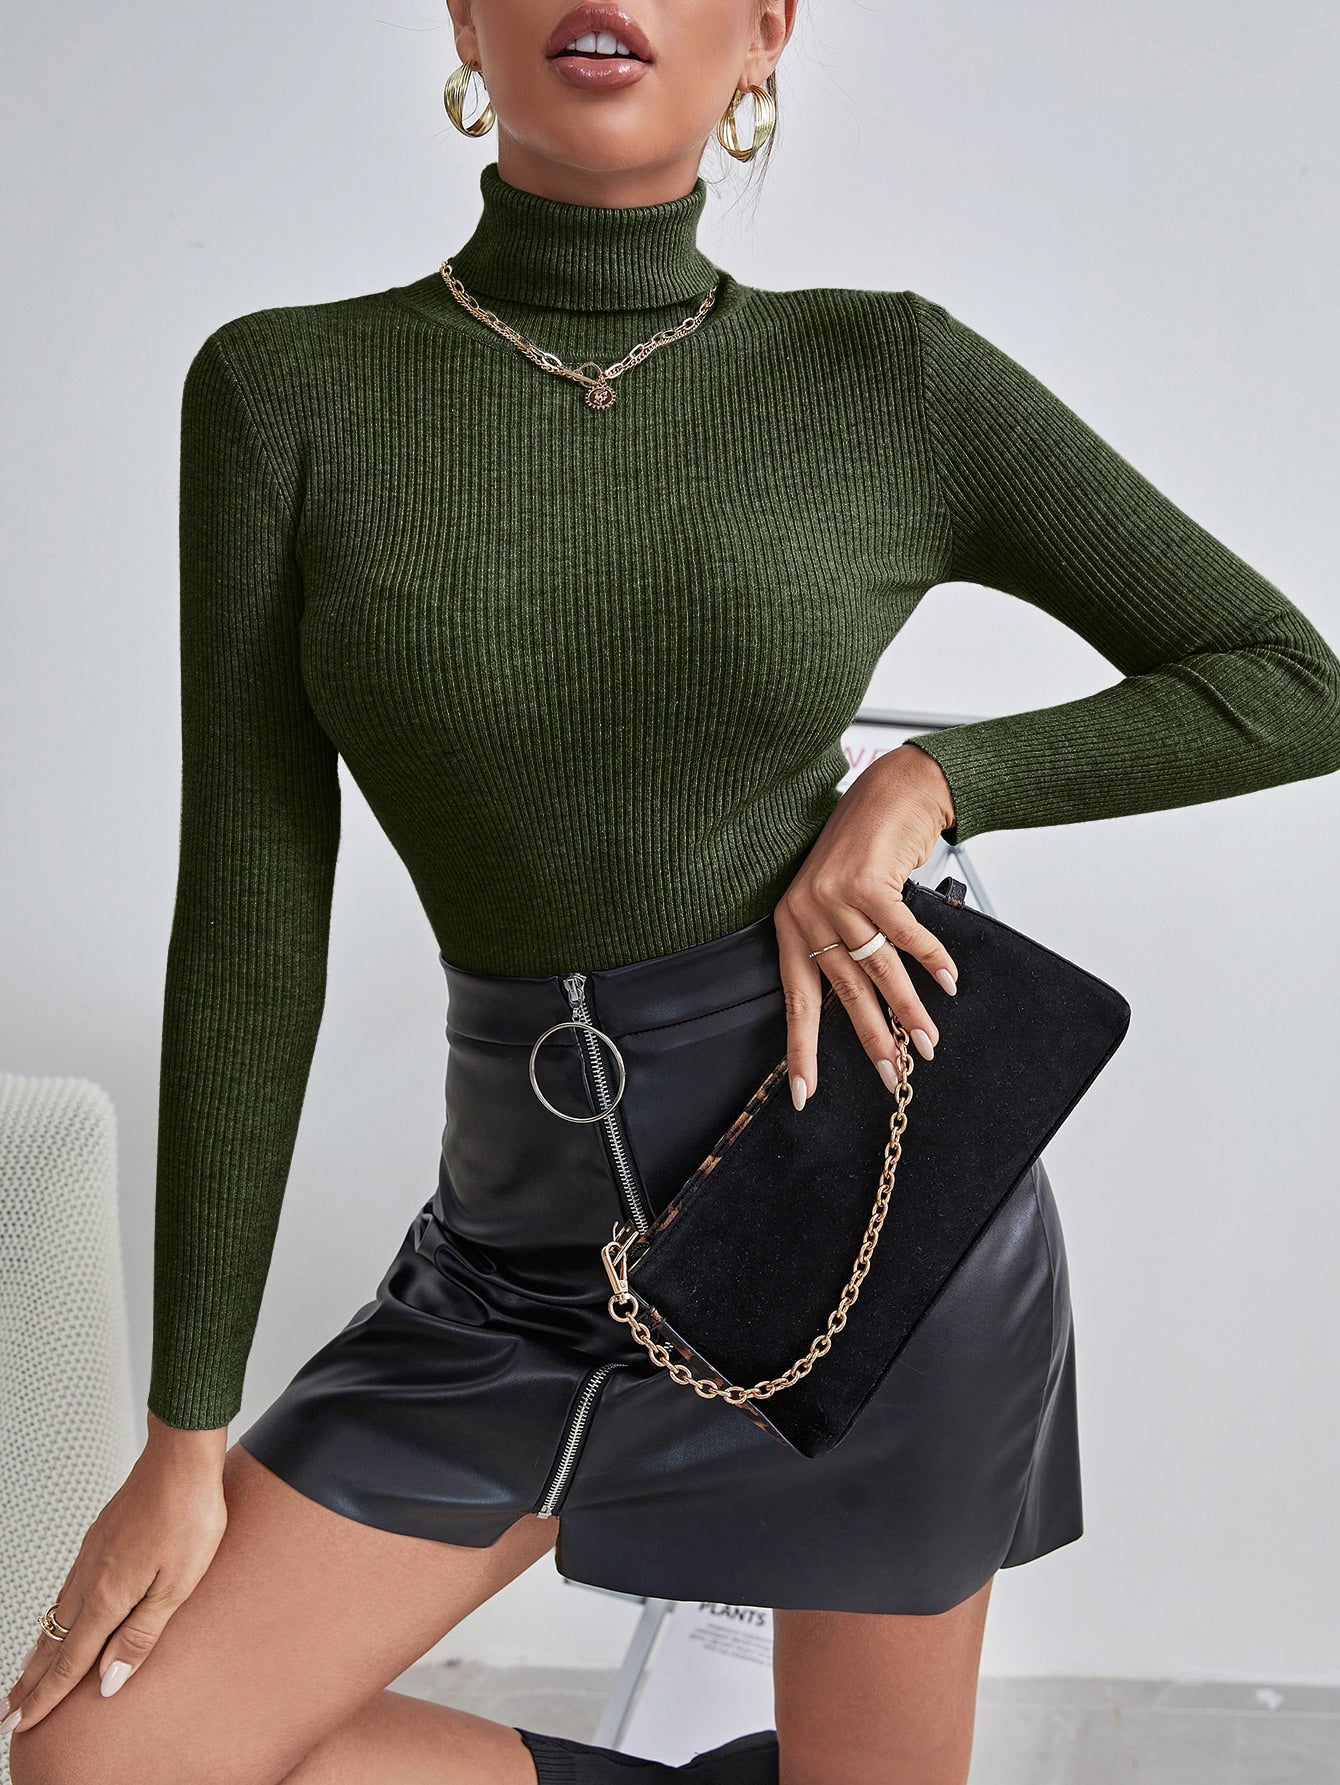 Solid High Neck Rib Knit Sweater